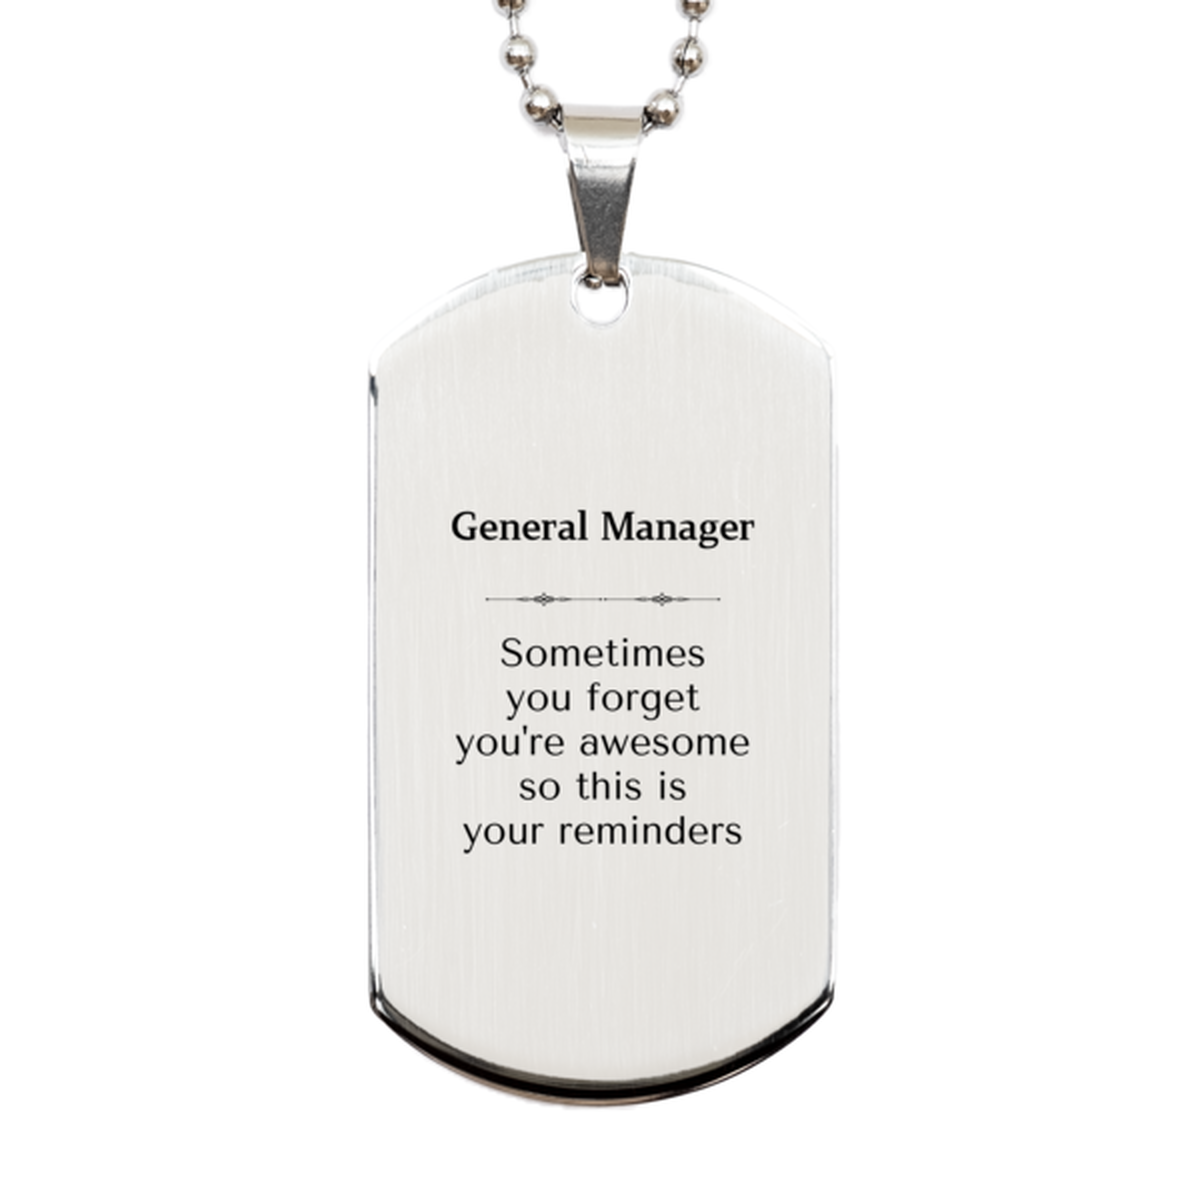 Sentimental General Manager Silver Dog Tag, General Manager Sometimes you forget you're awesome so this is your reminders, Graduation Christmas Birthday Gifts for General Manager, Men, Women, Coworkers